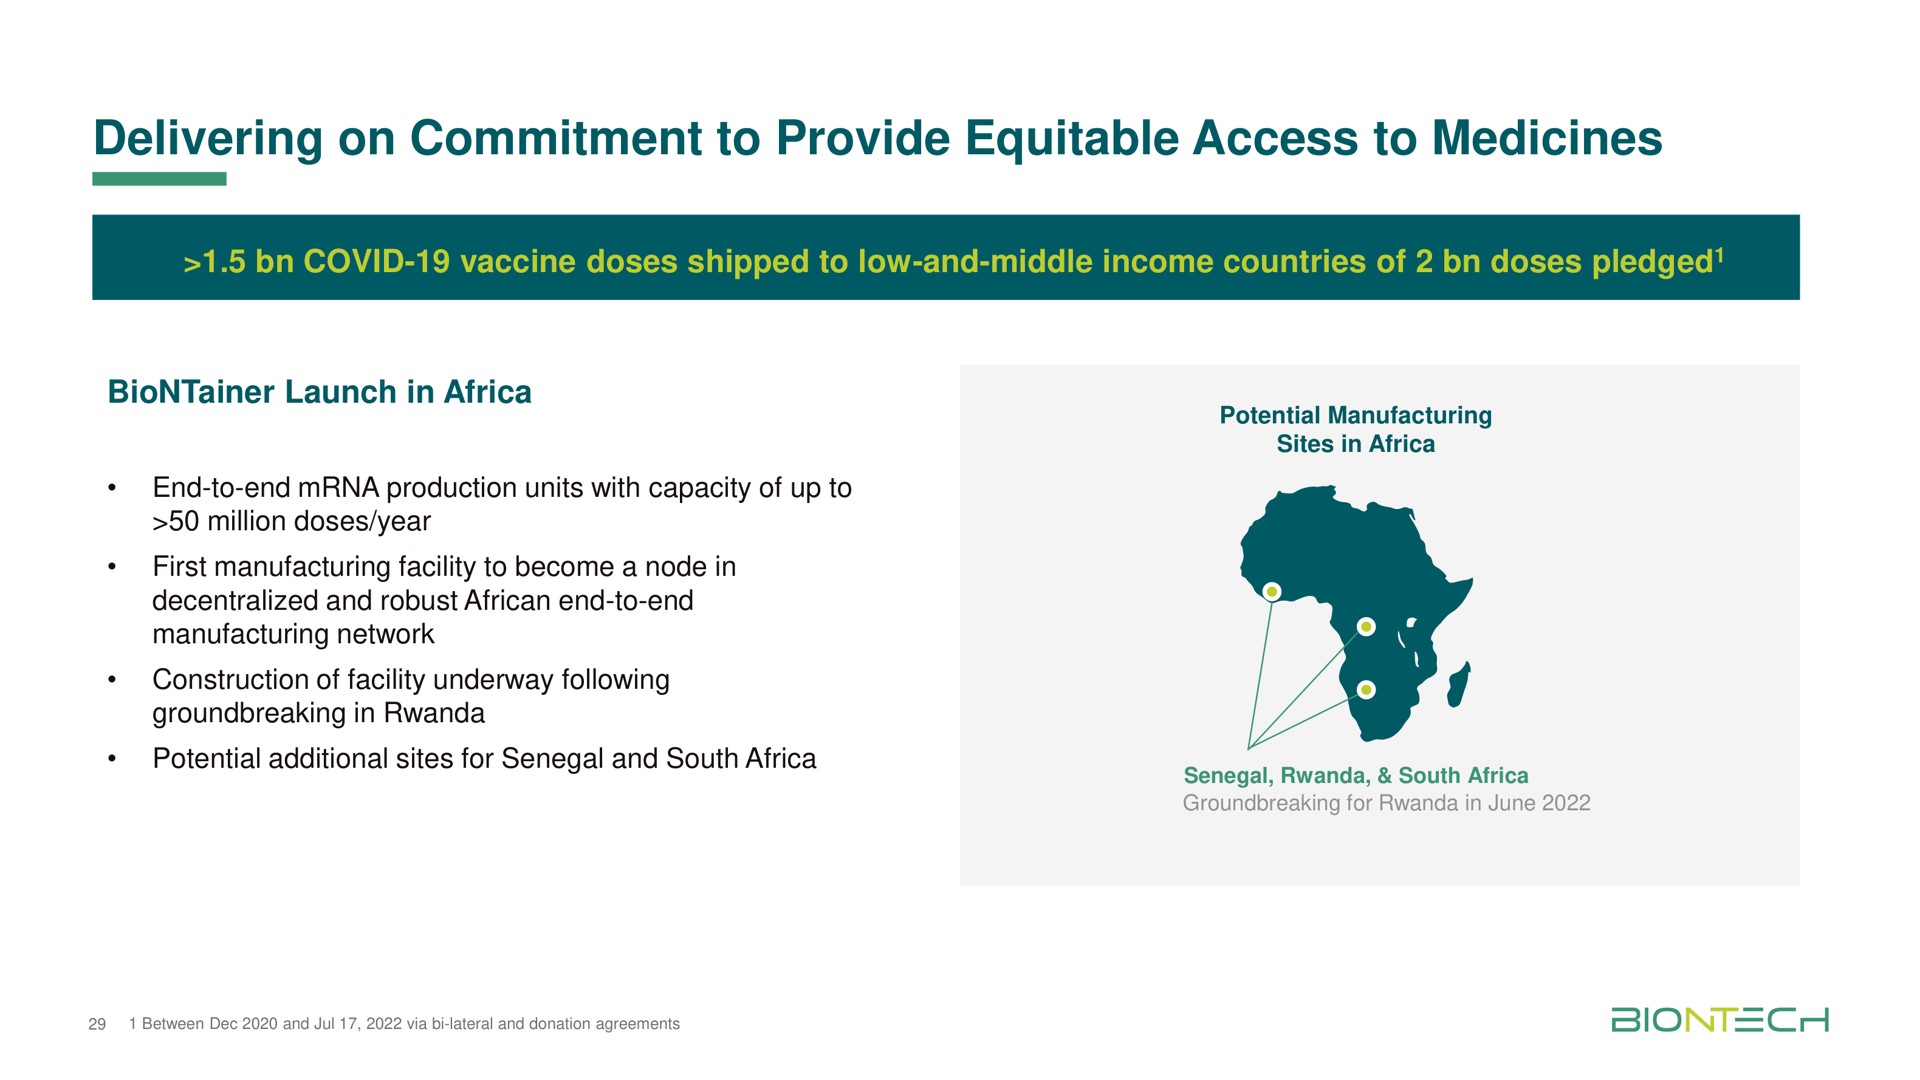 delivering on commitment to provide equitable access to medicines | BioNTech